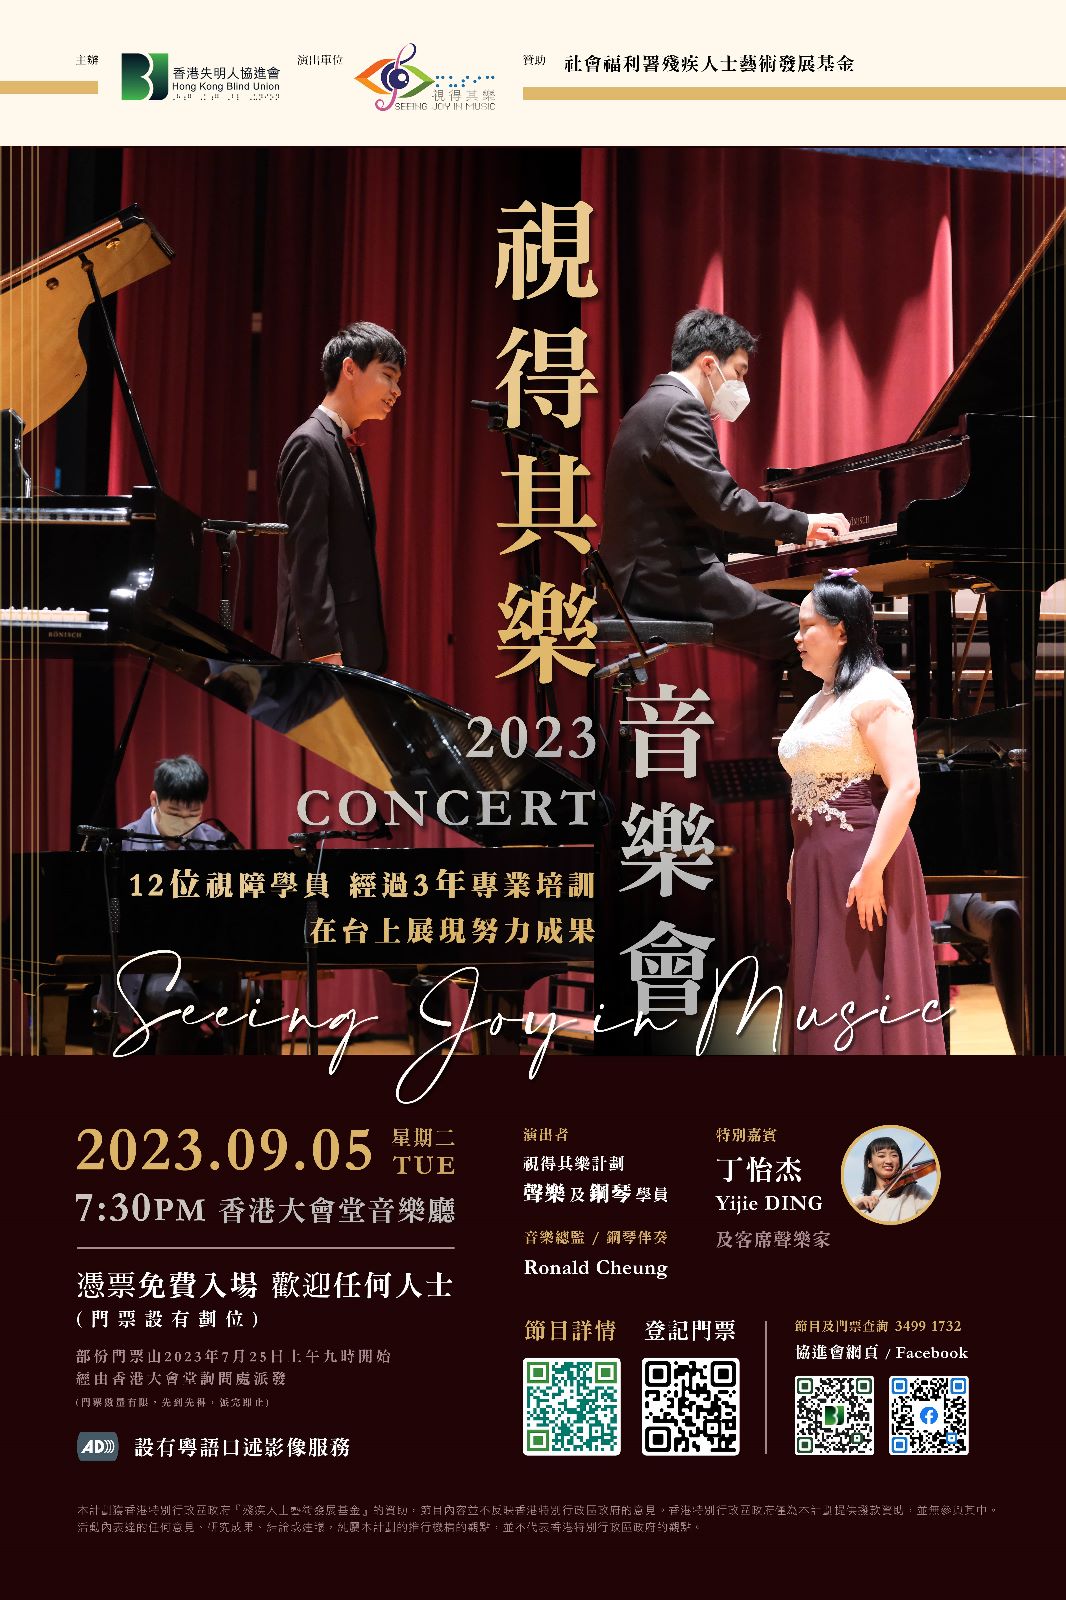 Seeing Joy In Music Concert 2023 - The 3rd student performance of Hong Kong Blind Union Music Project